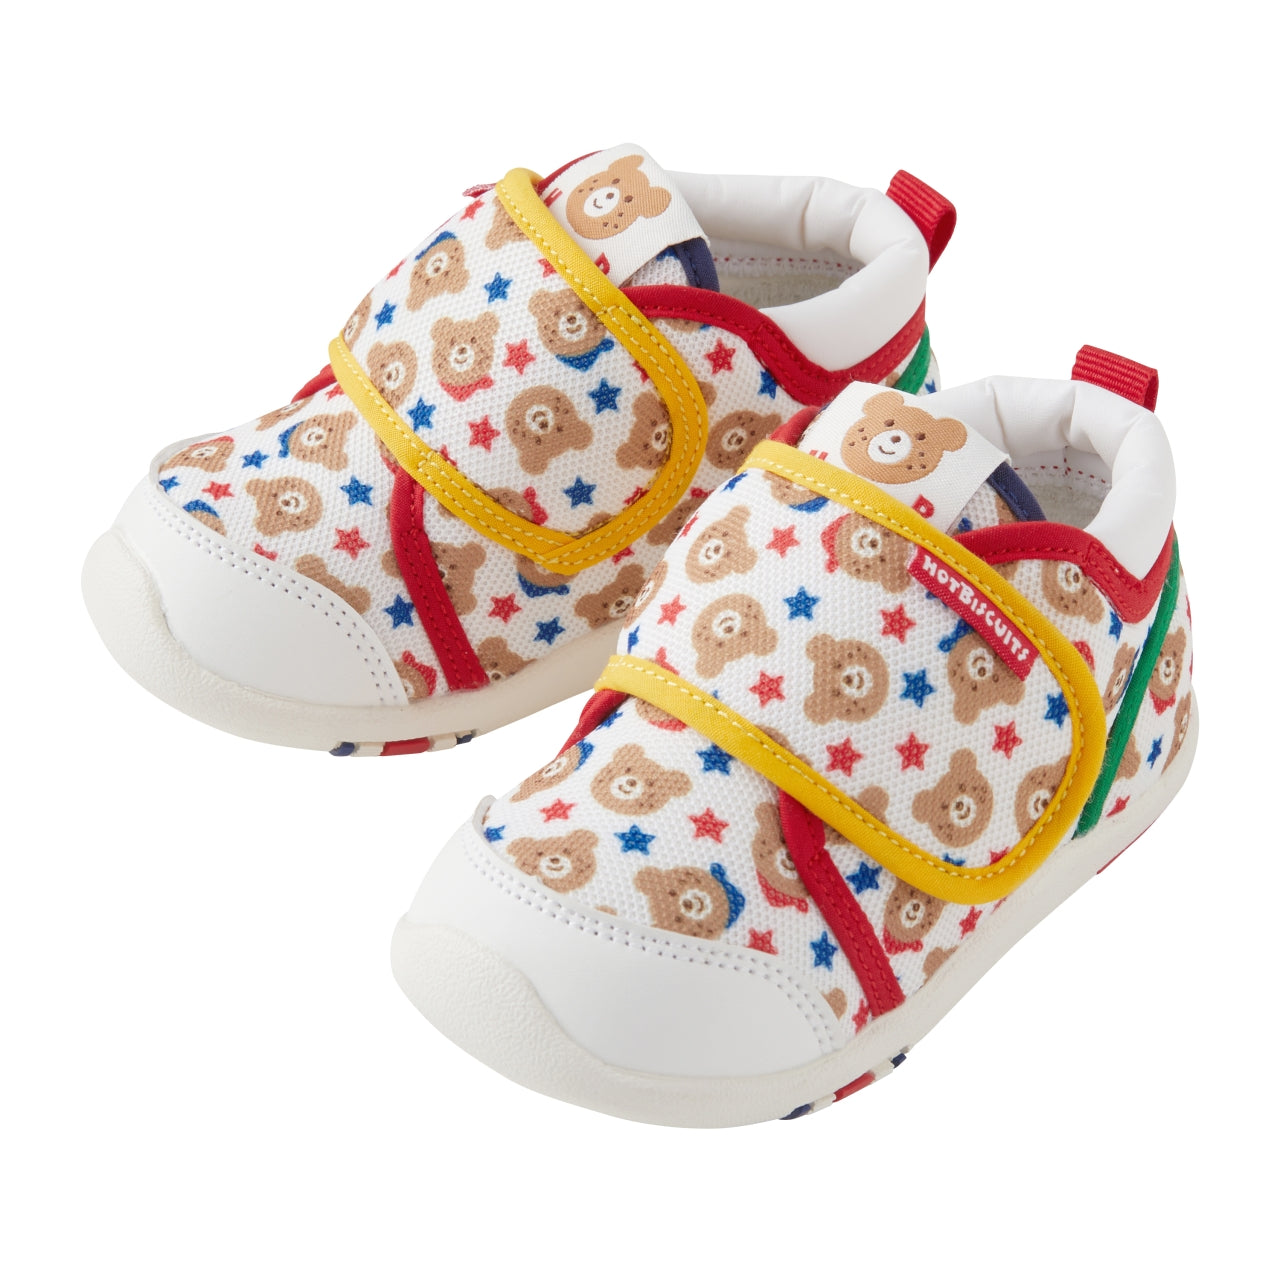 HB - Second Shoes - Starlit Bears